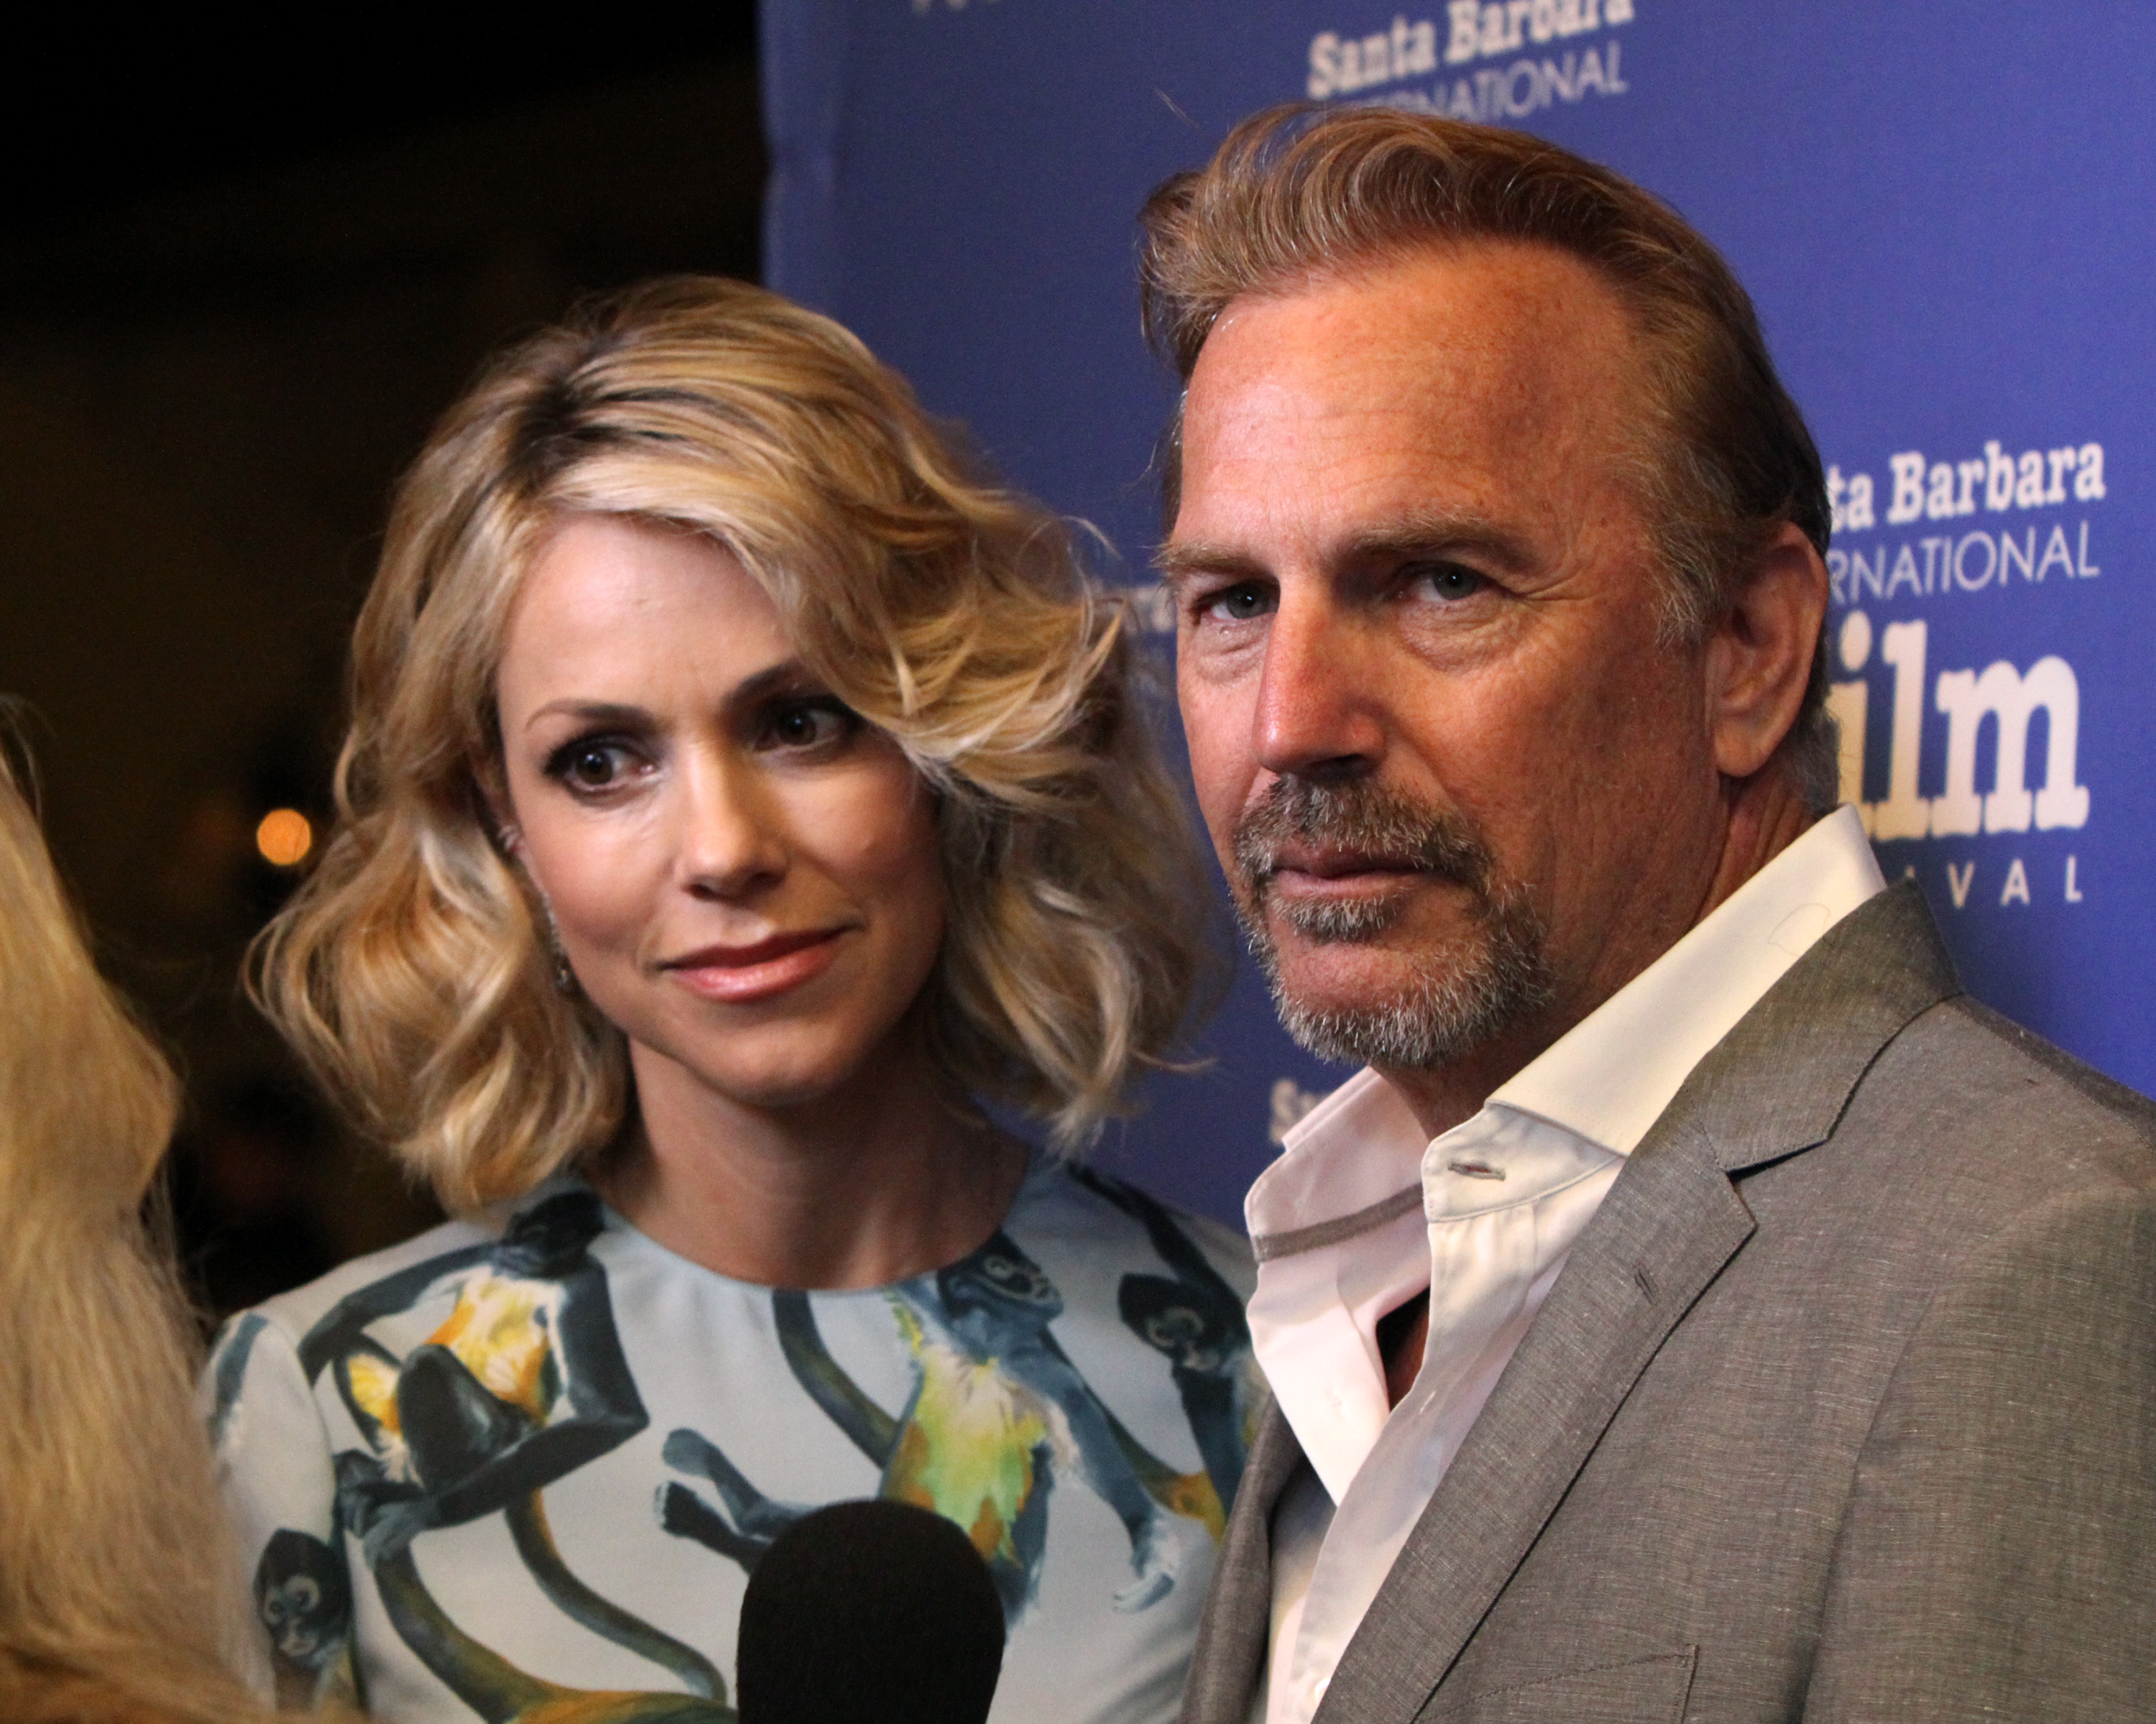 Kevin Costner and wife Christine Baumgartner at Arlington Theater on February 7, 2015, in Santa Barbara, California. | Source: Getty Images